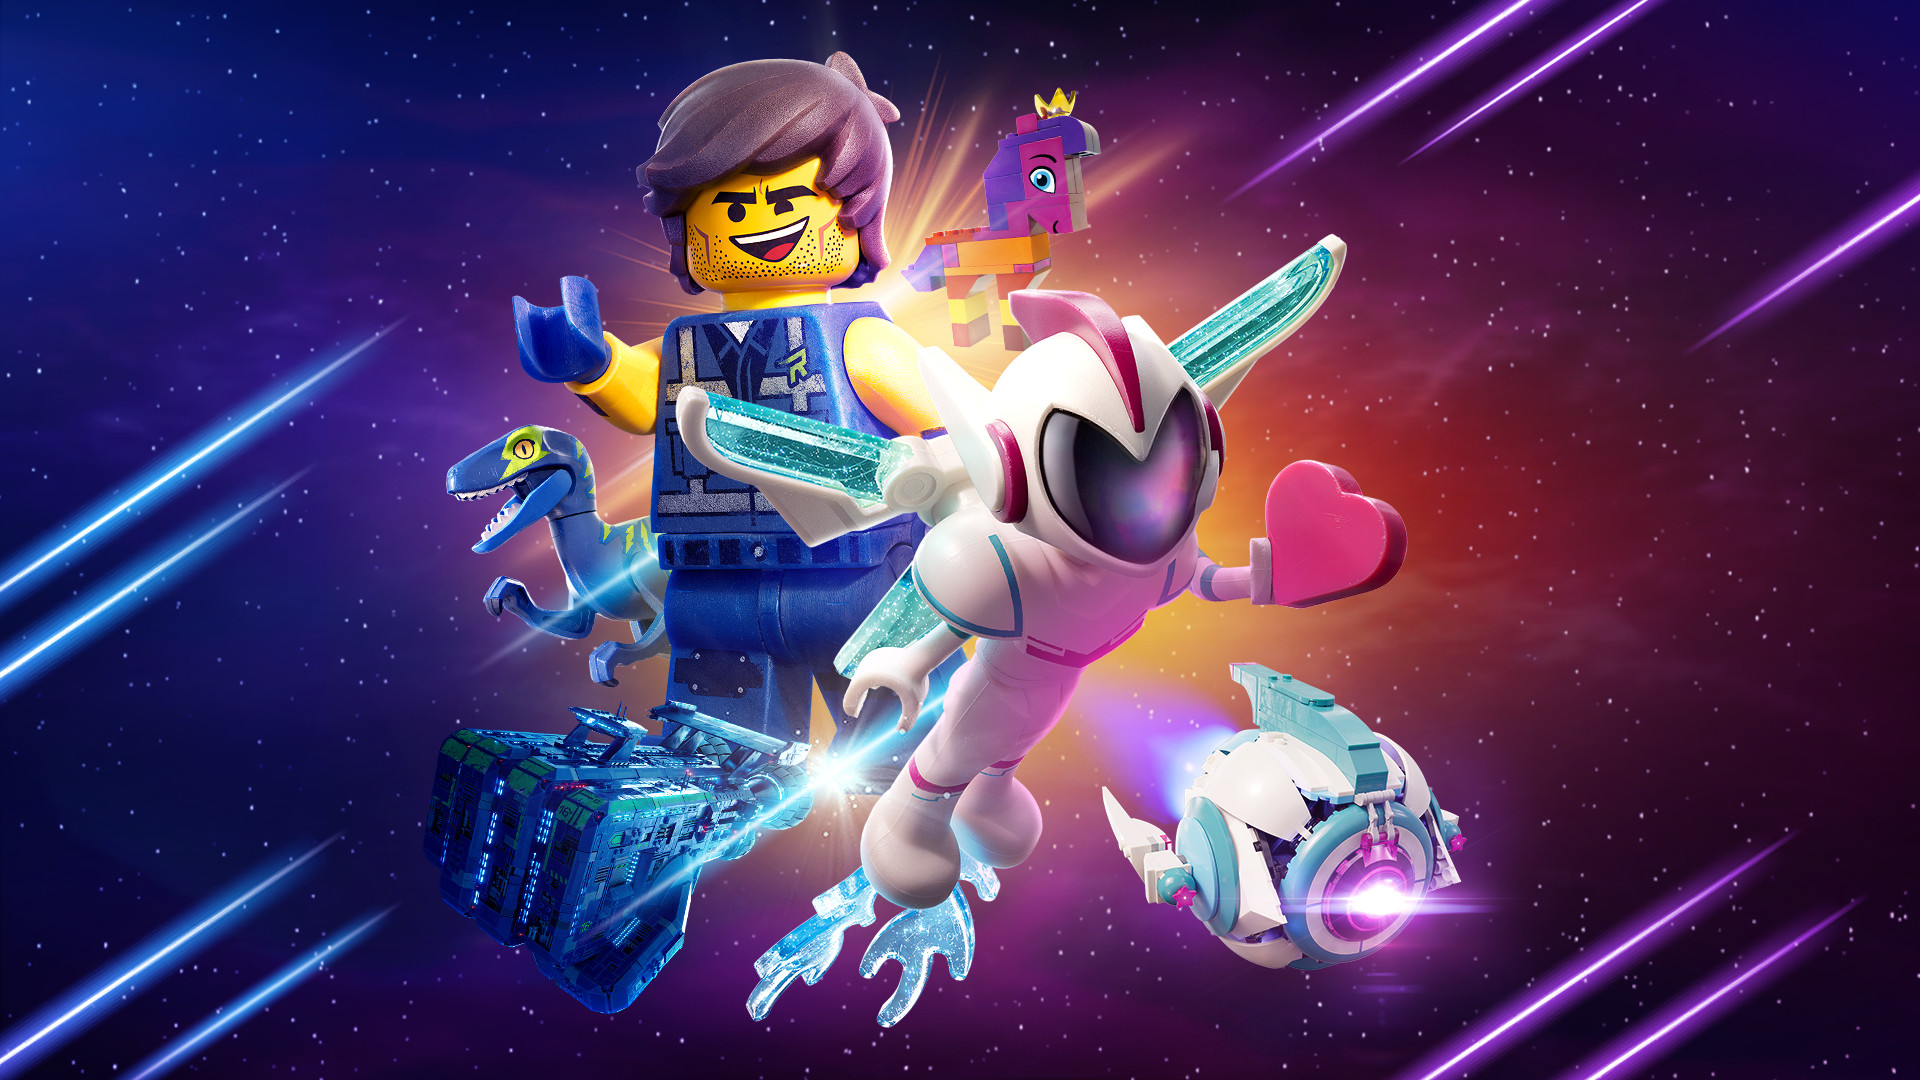 The LEGO Movie 2 Videogame - Galactic Adventures Character & Level Pack on  Steam